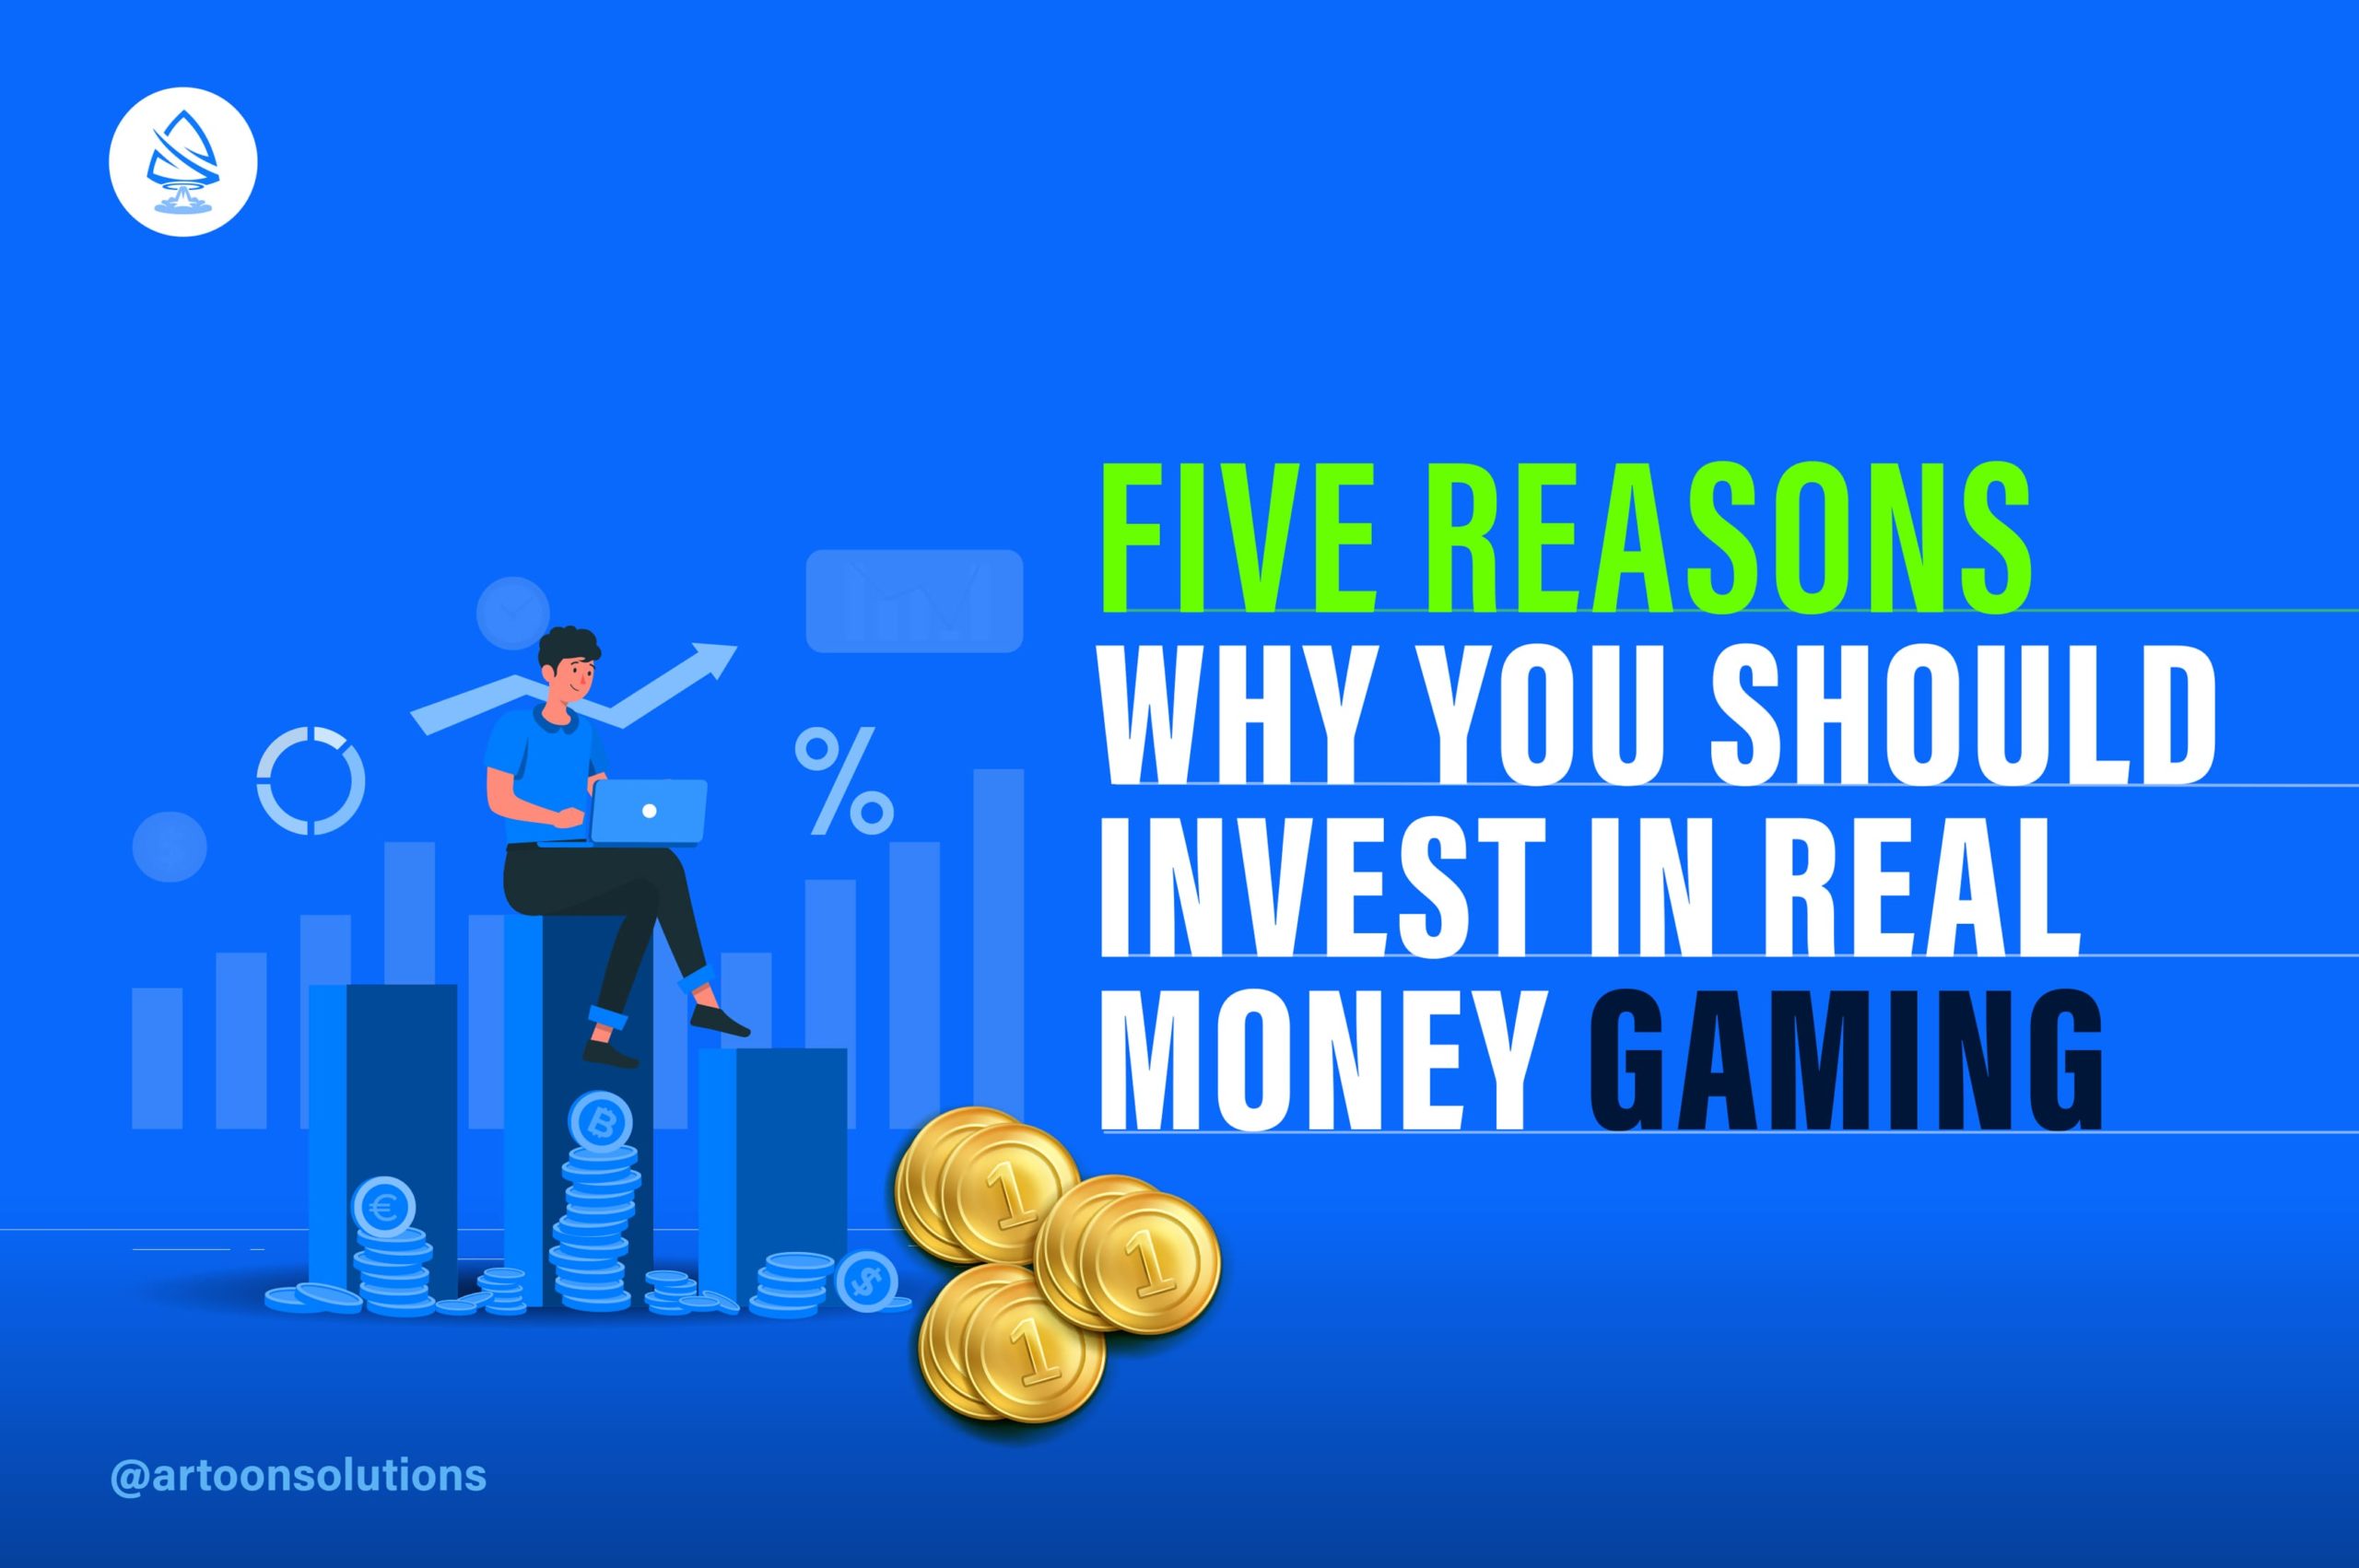 Real money games are also known as skill-based games where all types of games that include skill, strategy, tactics, proper game knowledge, and logical thinking are involved. This is one of the most common reasons why many people play real money games.